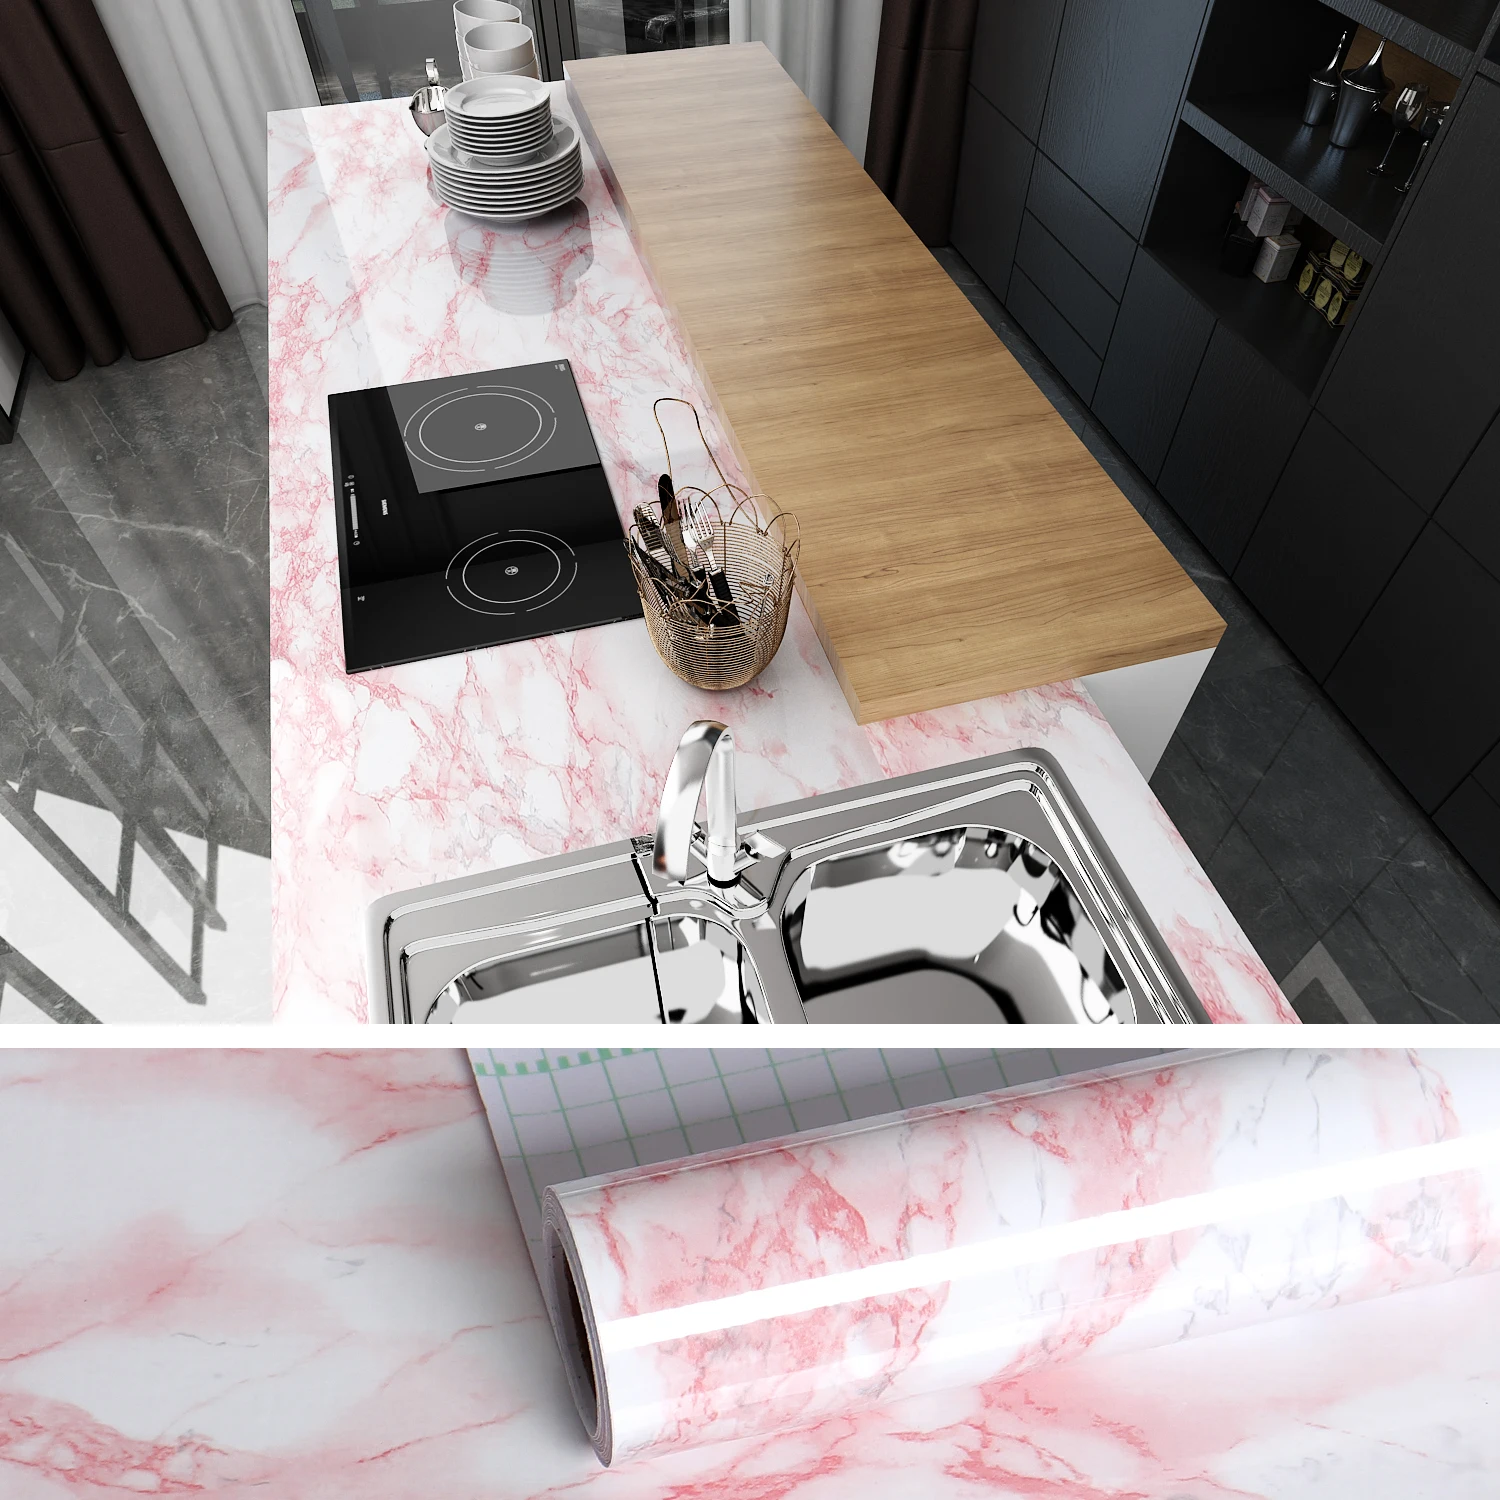 

Pink Marble Self Adhesive Wallpapers Stick and Peel Stickers Removable Waterproof Wall Covering Table Countertop Cabinet Drawer